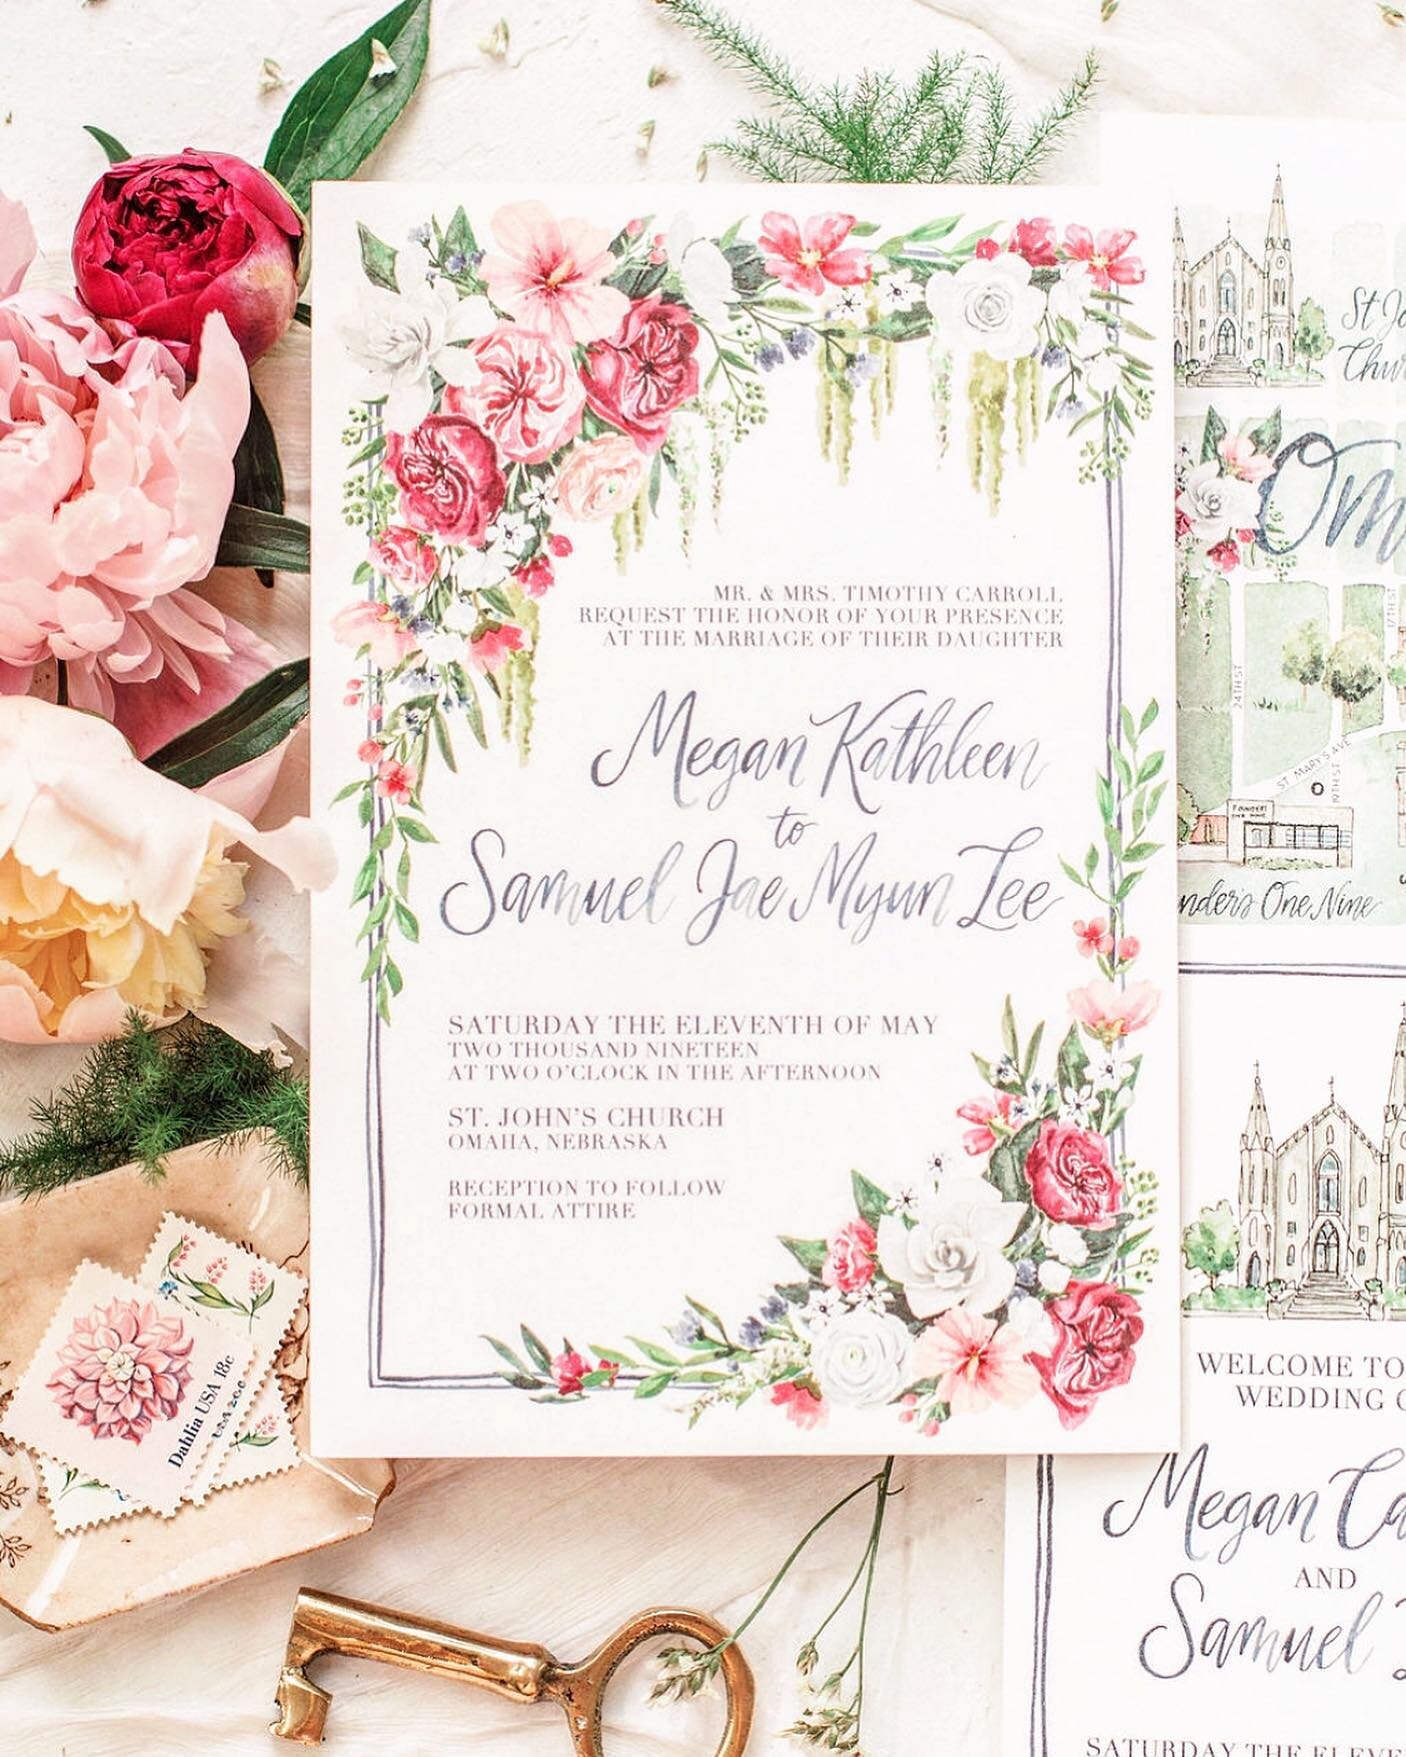 Anniversary alert! 🌸💍🌺🥂
.
Cheers to Megan and Sam on their 2nd anniversary today!  Thanks for letting me dream up some magic in your hot pink and blush world! Congrats you two!
.
#wedding #weddinginvitations #weddinginvite #weddingstationery #cus